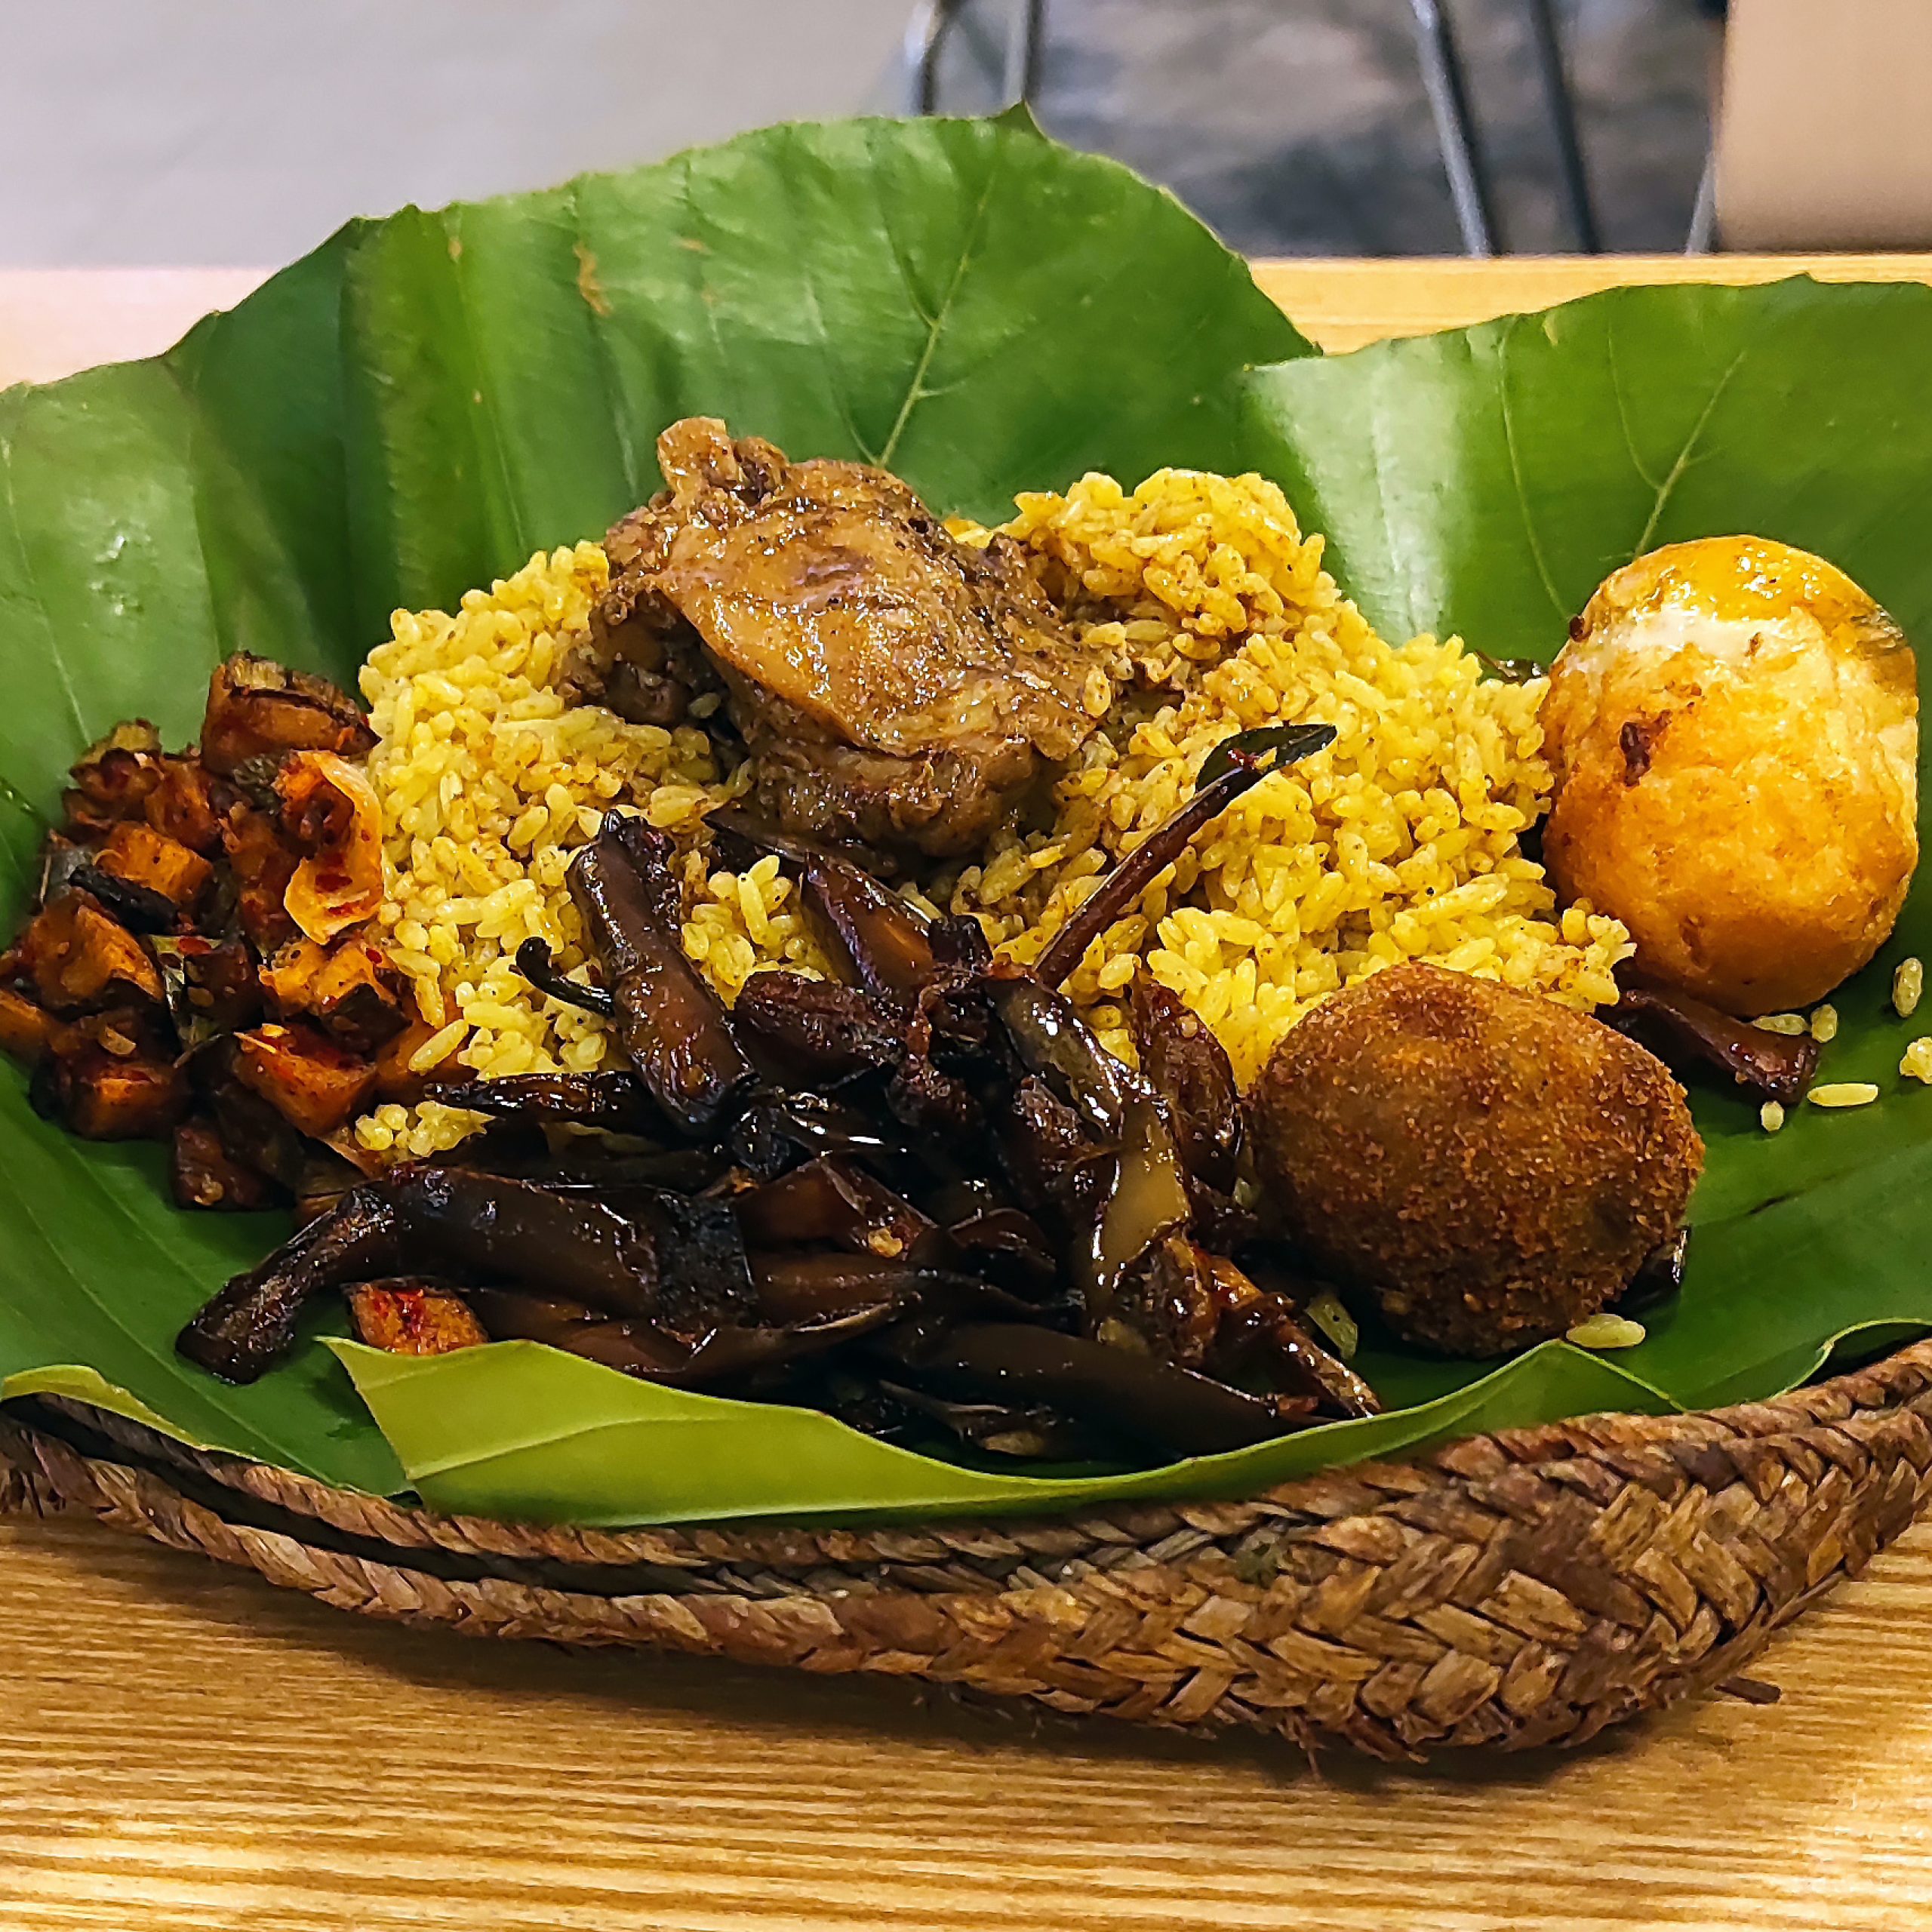 Discover the flavours of Sri Lankan cuisine : a culinary adventure awaits!